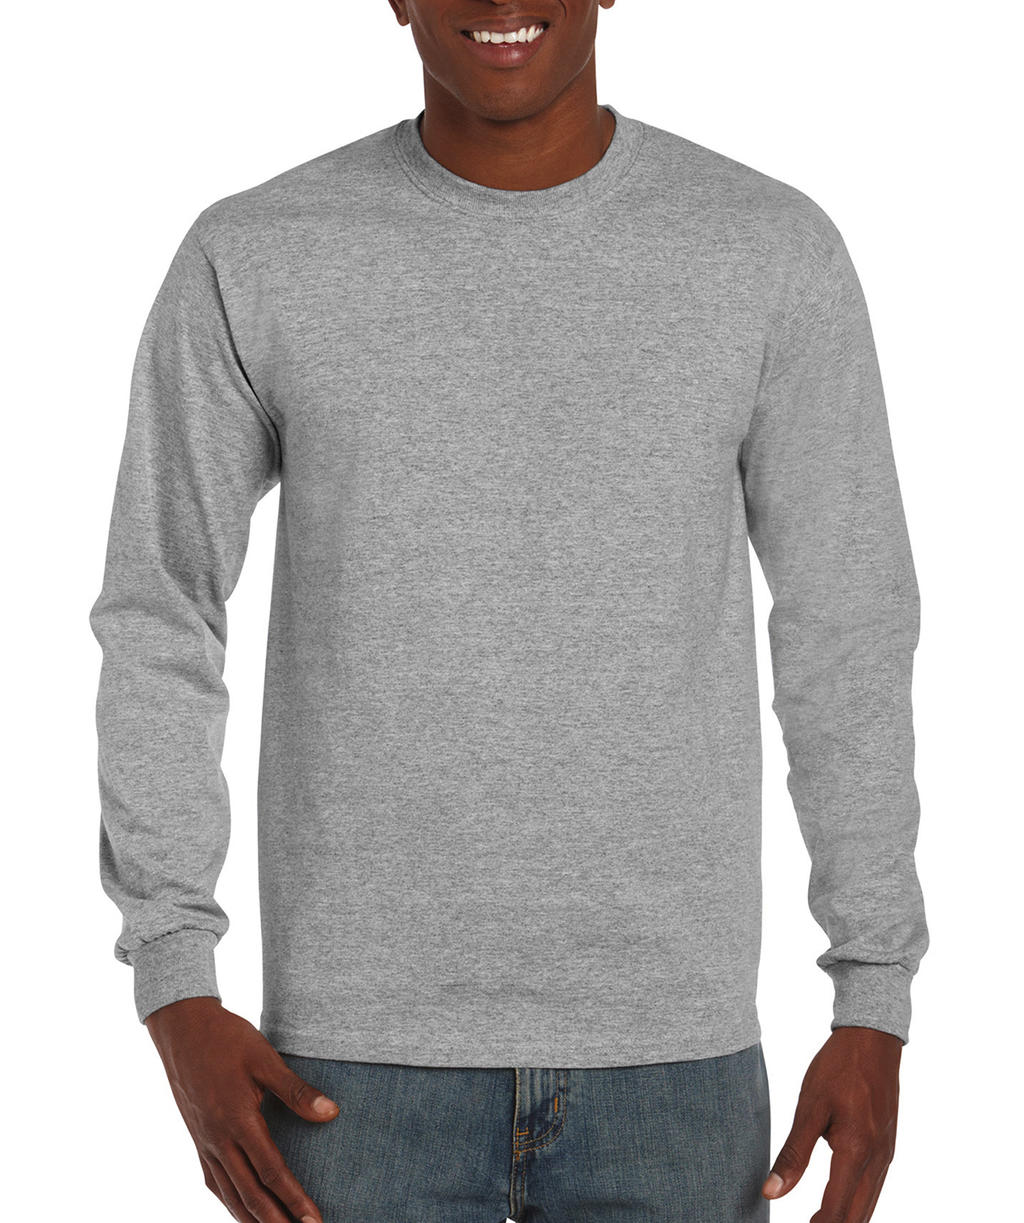  Hammer? Adult Long Sleeve T-Shirt in Farbe Sport Grey